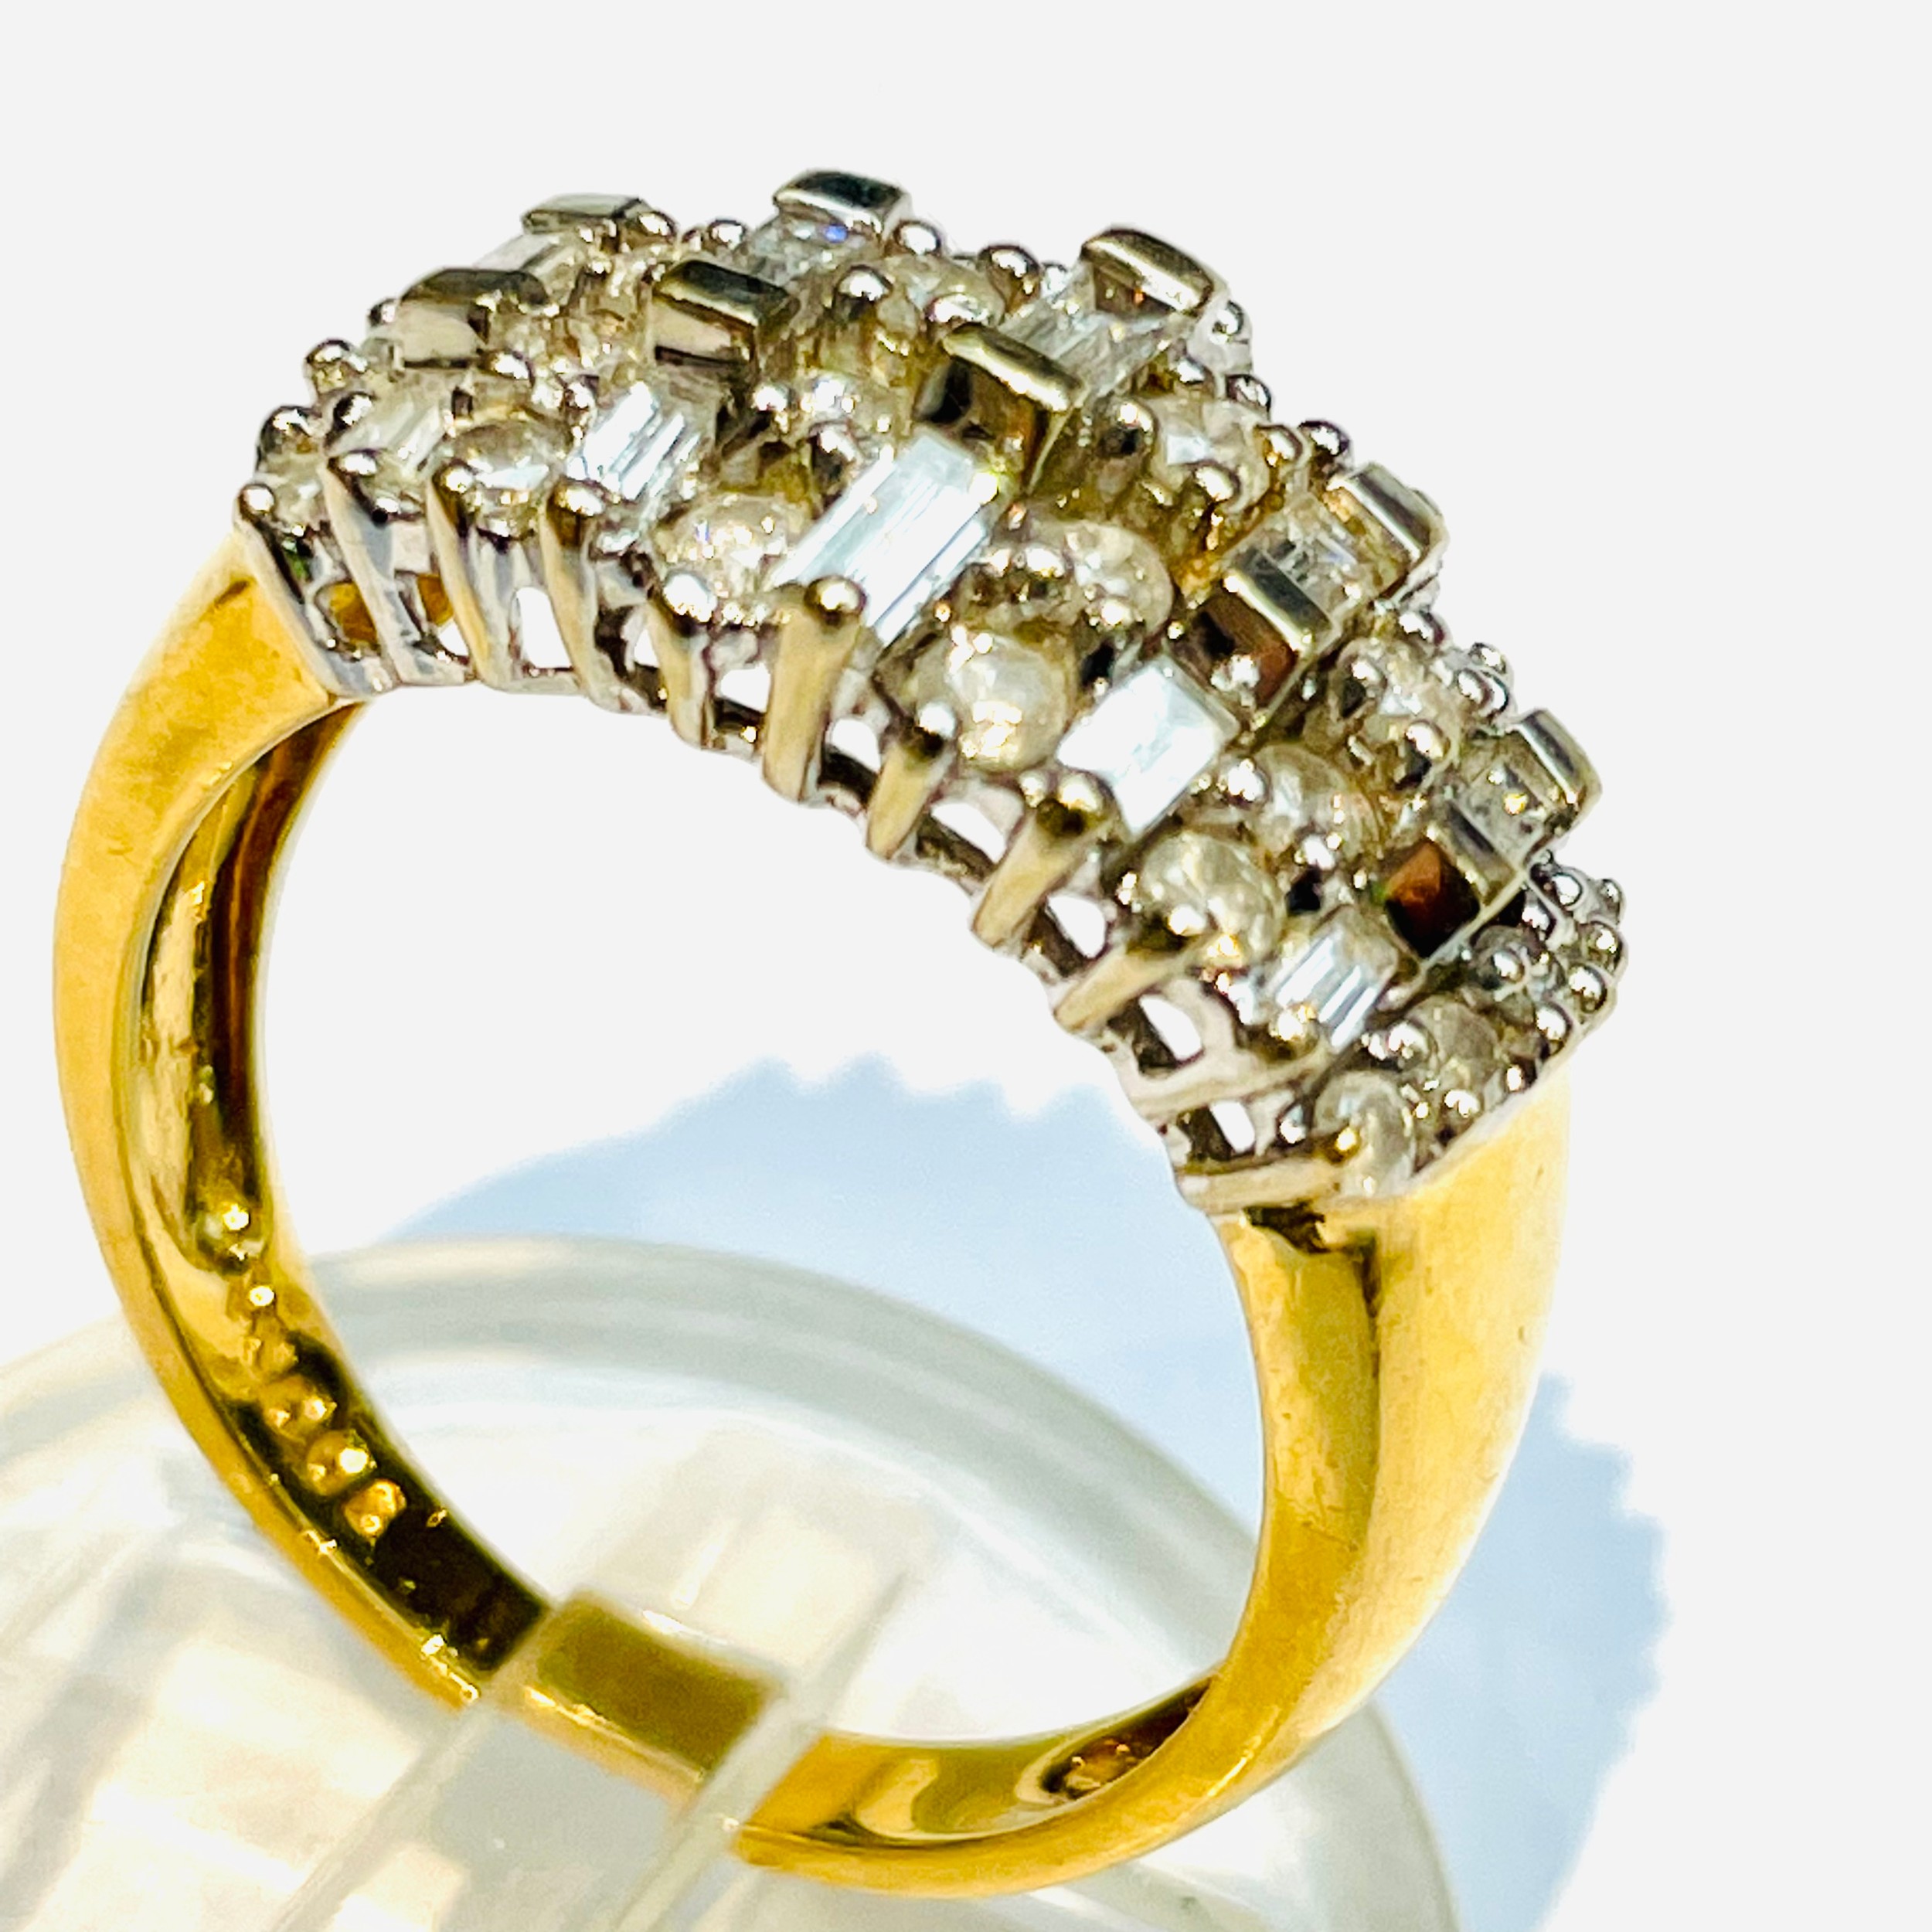 An 18ct yellow gold diamond dress ring, set with 28 x round brilliant cut diamonds and 15 baguette - Image 3 of 3